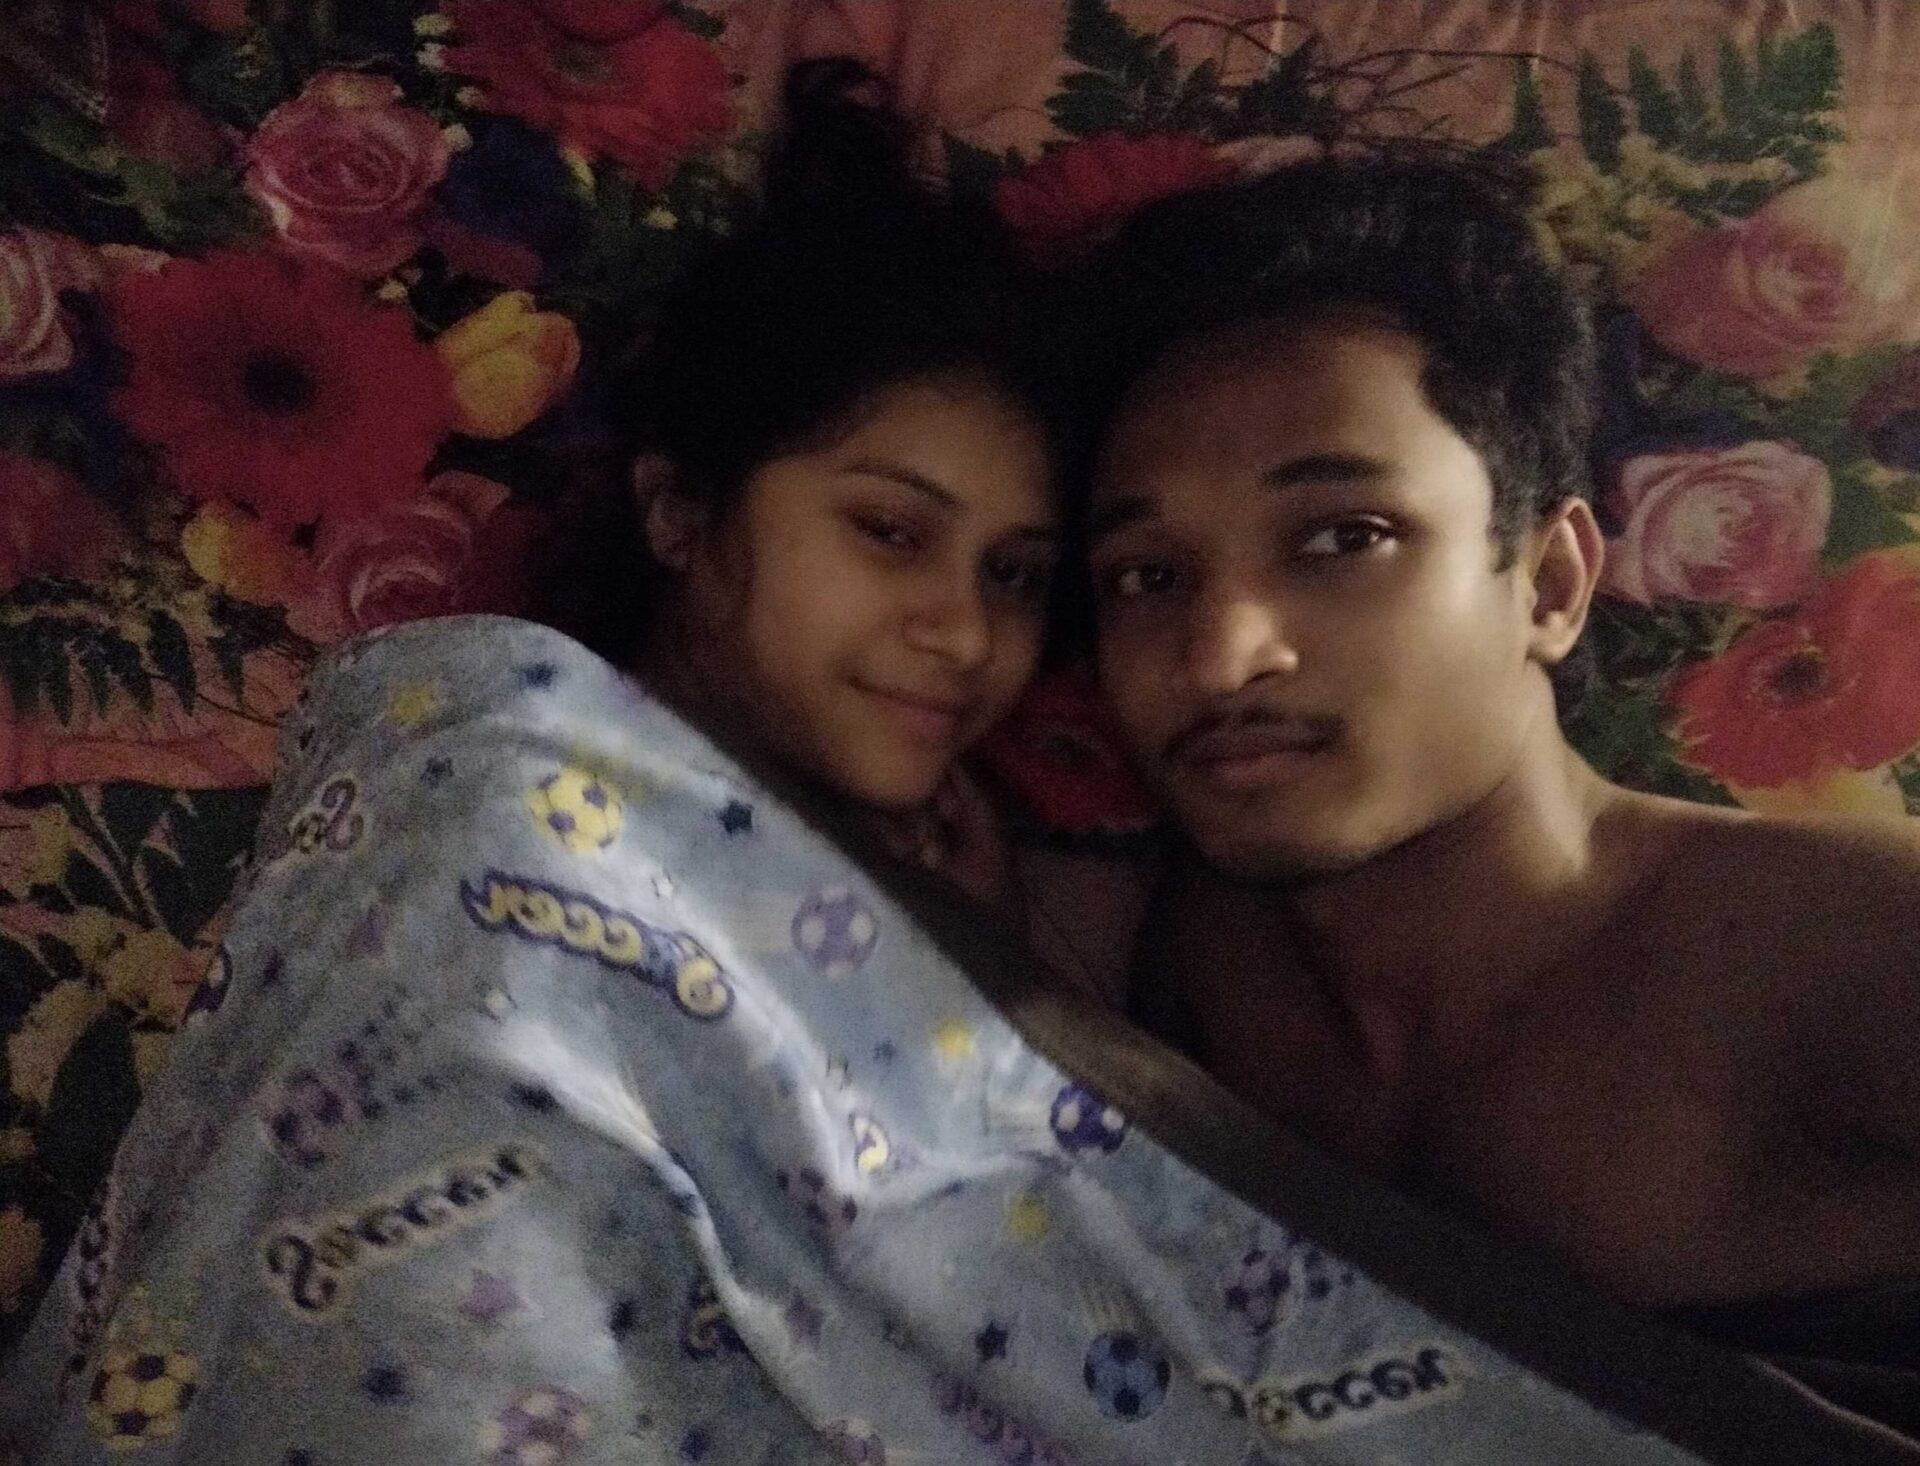 Newly married couple first night romance photos image